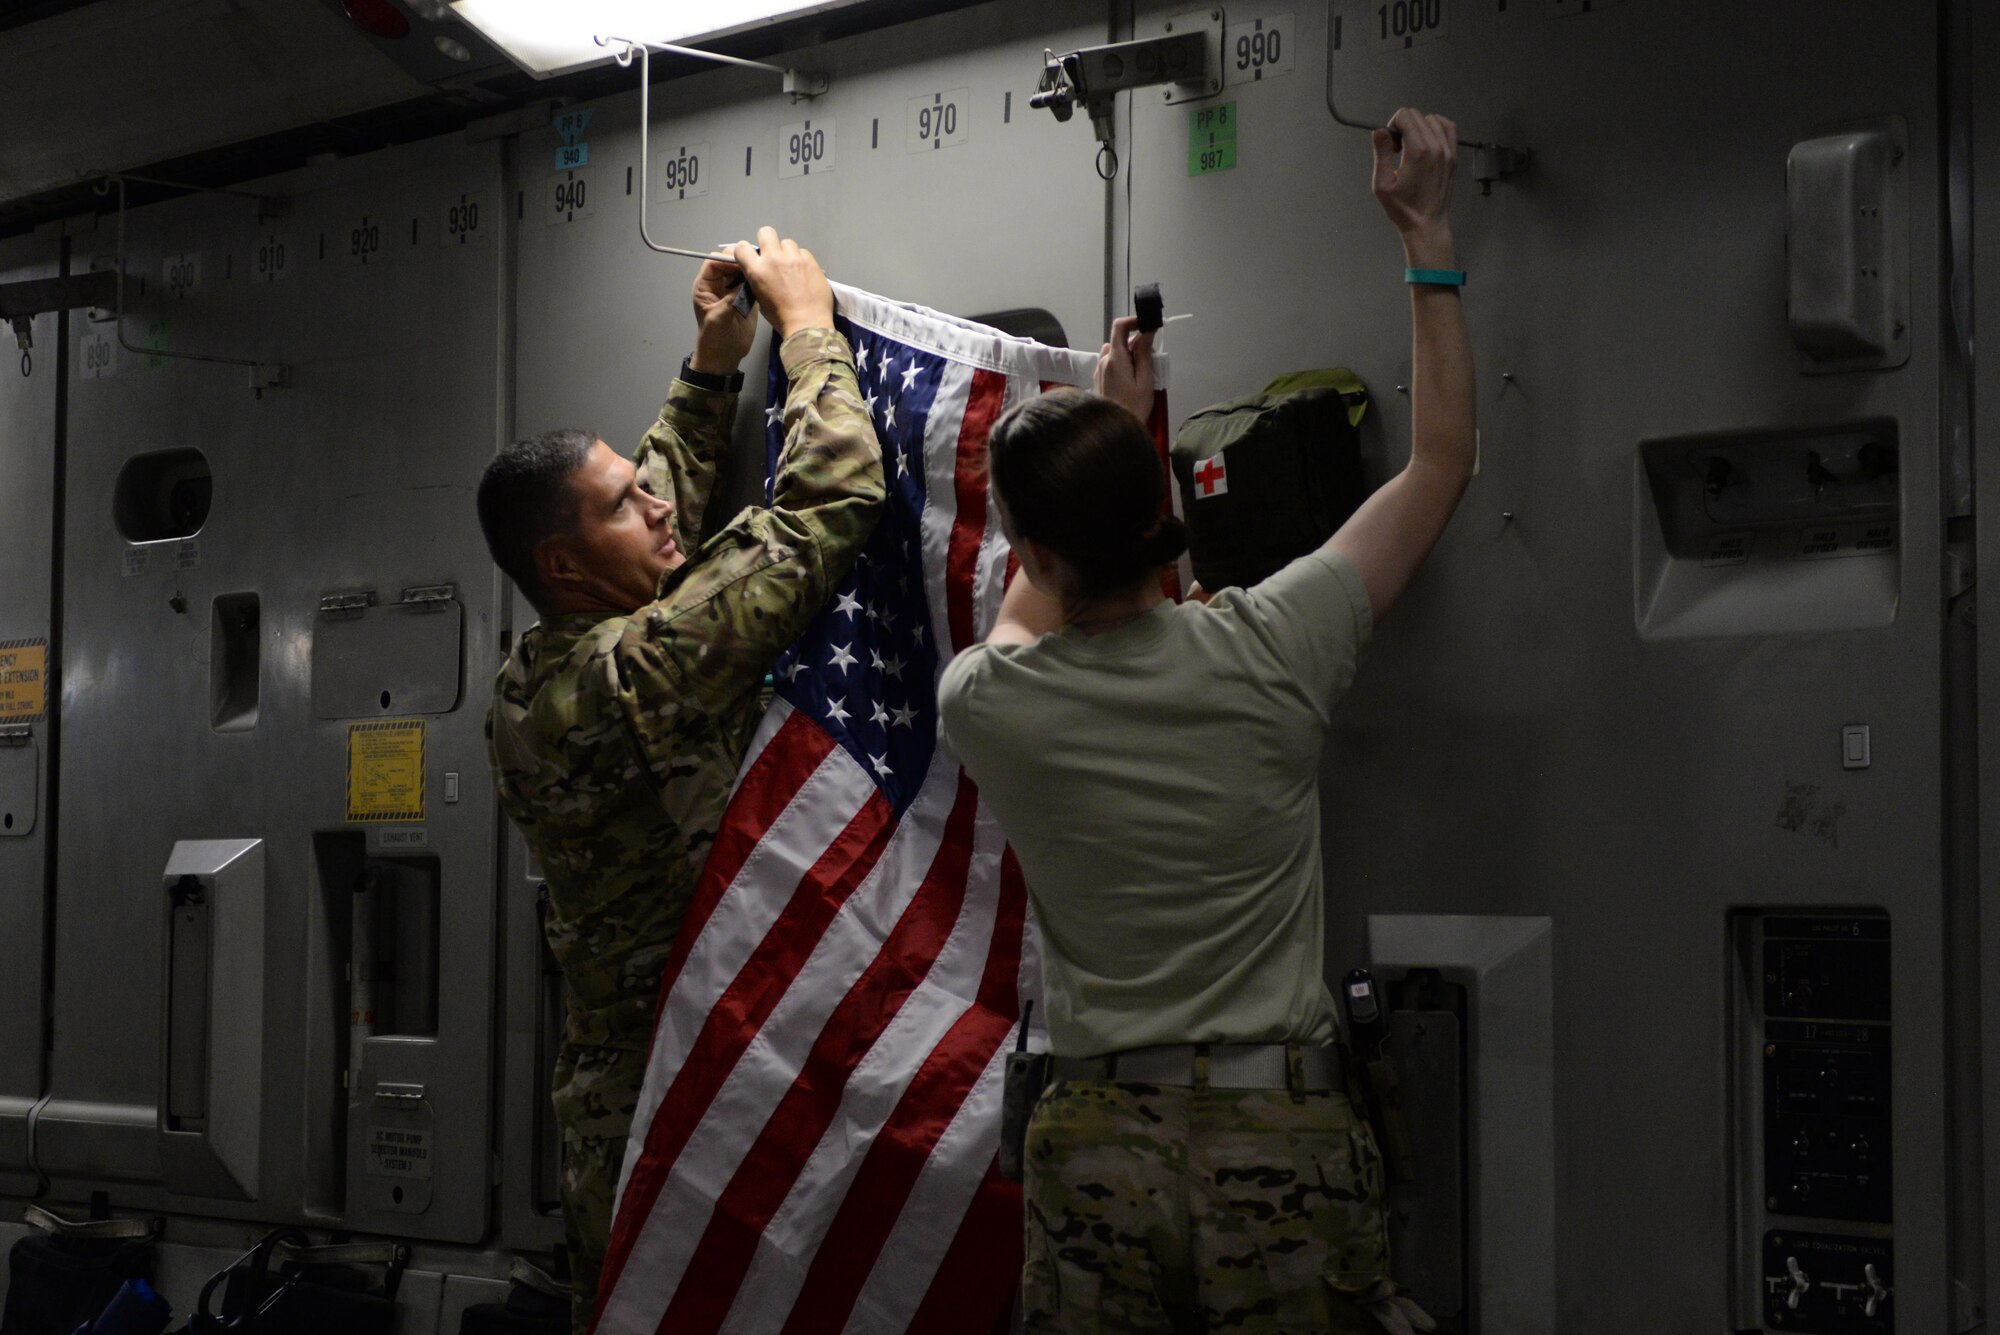 U.S. Air Force Tech. Sgt. Russell “Rusty” McLamb, left, 455th Expeditionary Aeromedical Evacuation Squadron technician deployed from the North Carolina Air National Guard’s 156th Aeromedical Evacuation Squadron, hangs an American flag on a C-17 Globemaster III aircraft on the flight line at Bagram Airfield, Afghanistan, Aug. 8, 2015, prior to an aeromedical evacuation mission to Germany. McLamb is part of the 455th EAES, which is responsible for evacuating the sick and wounded from Central Command to higher echelons of medical care. (U.S. Air Force photo by Maj. Tony Wickman/Released)